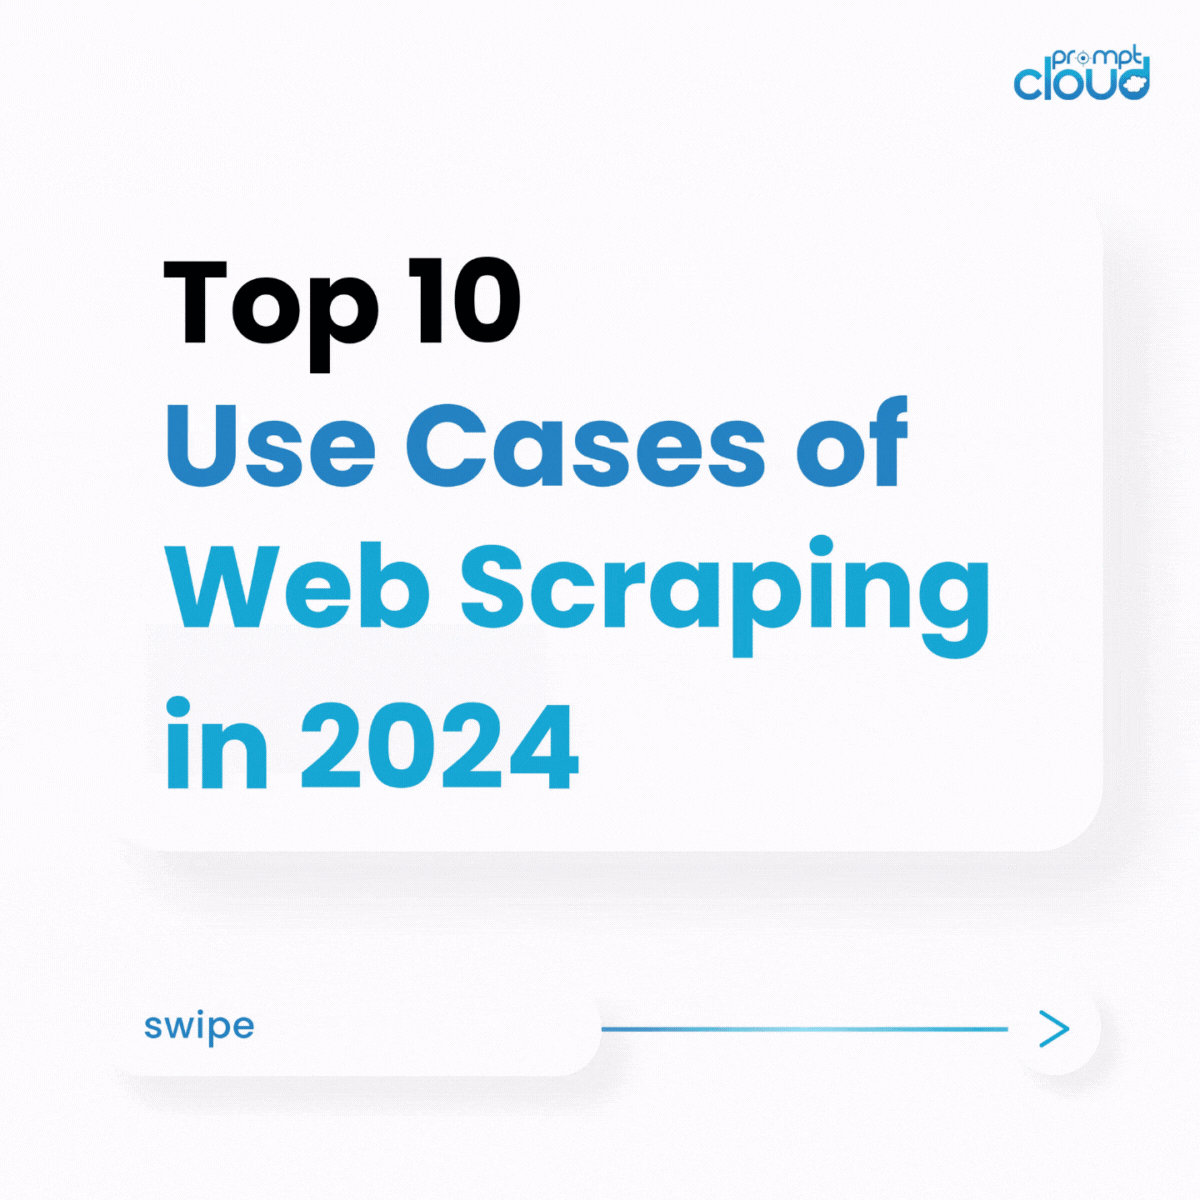 Web scraping use cases 